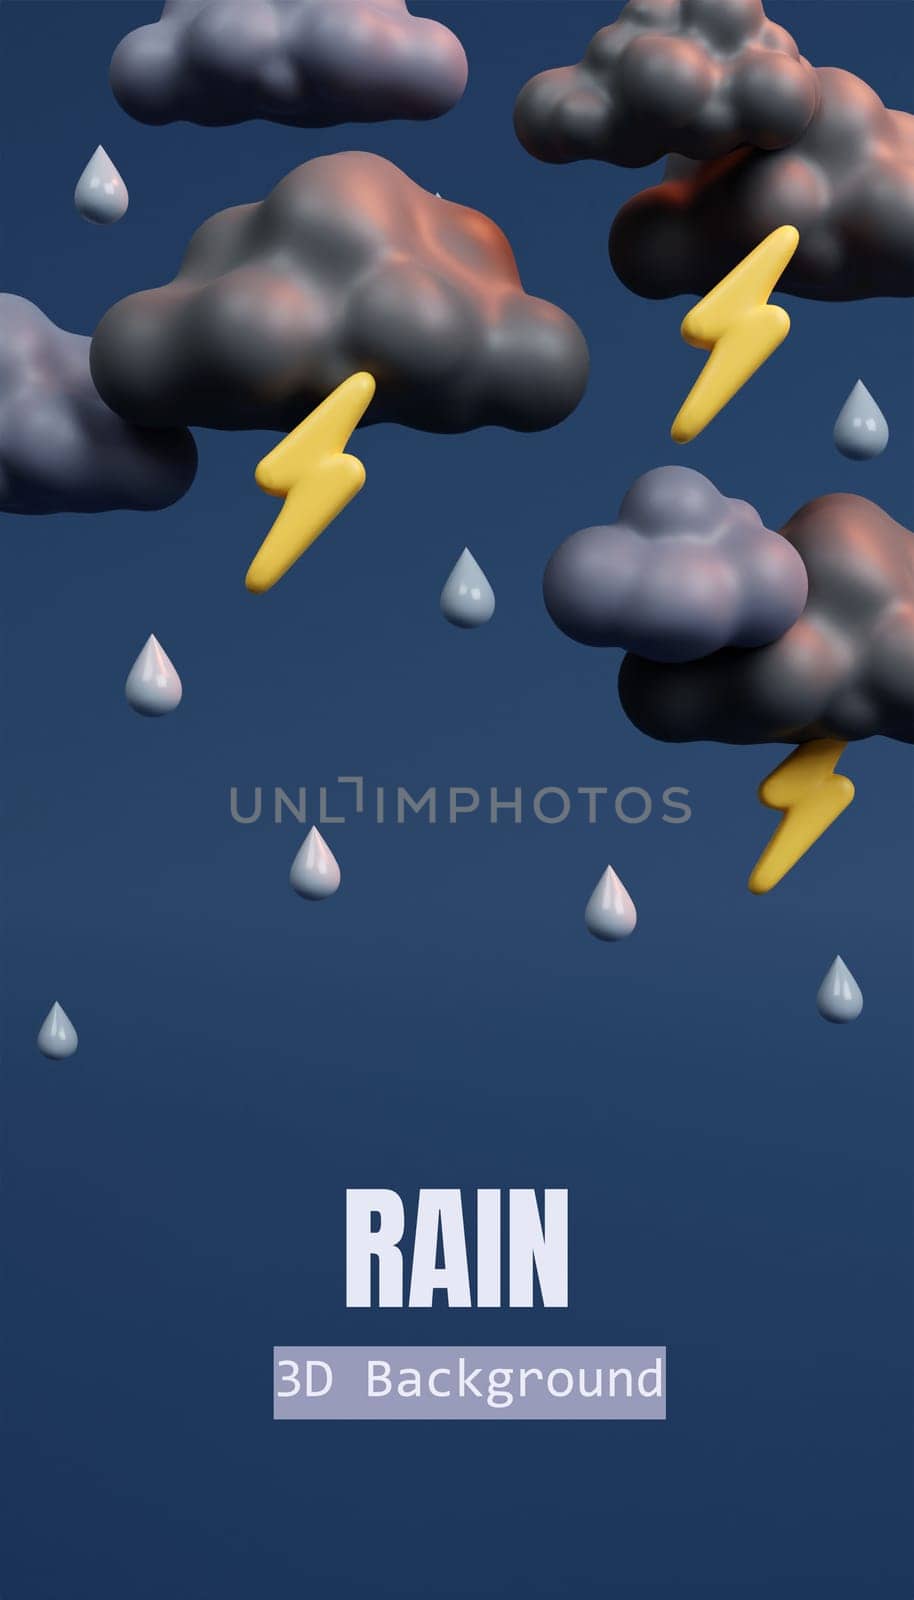 3d Weather forecast. Cloudy with rainy and lightning bolt . Meteorological. 3d rendering illustration. by meepiangraphic